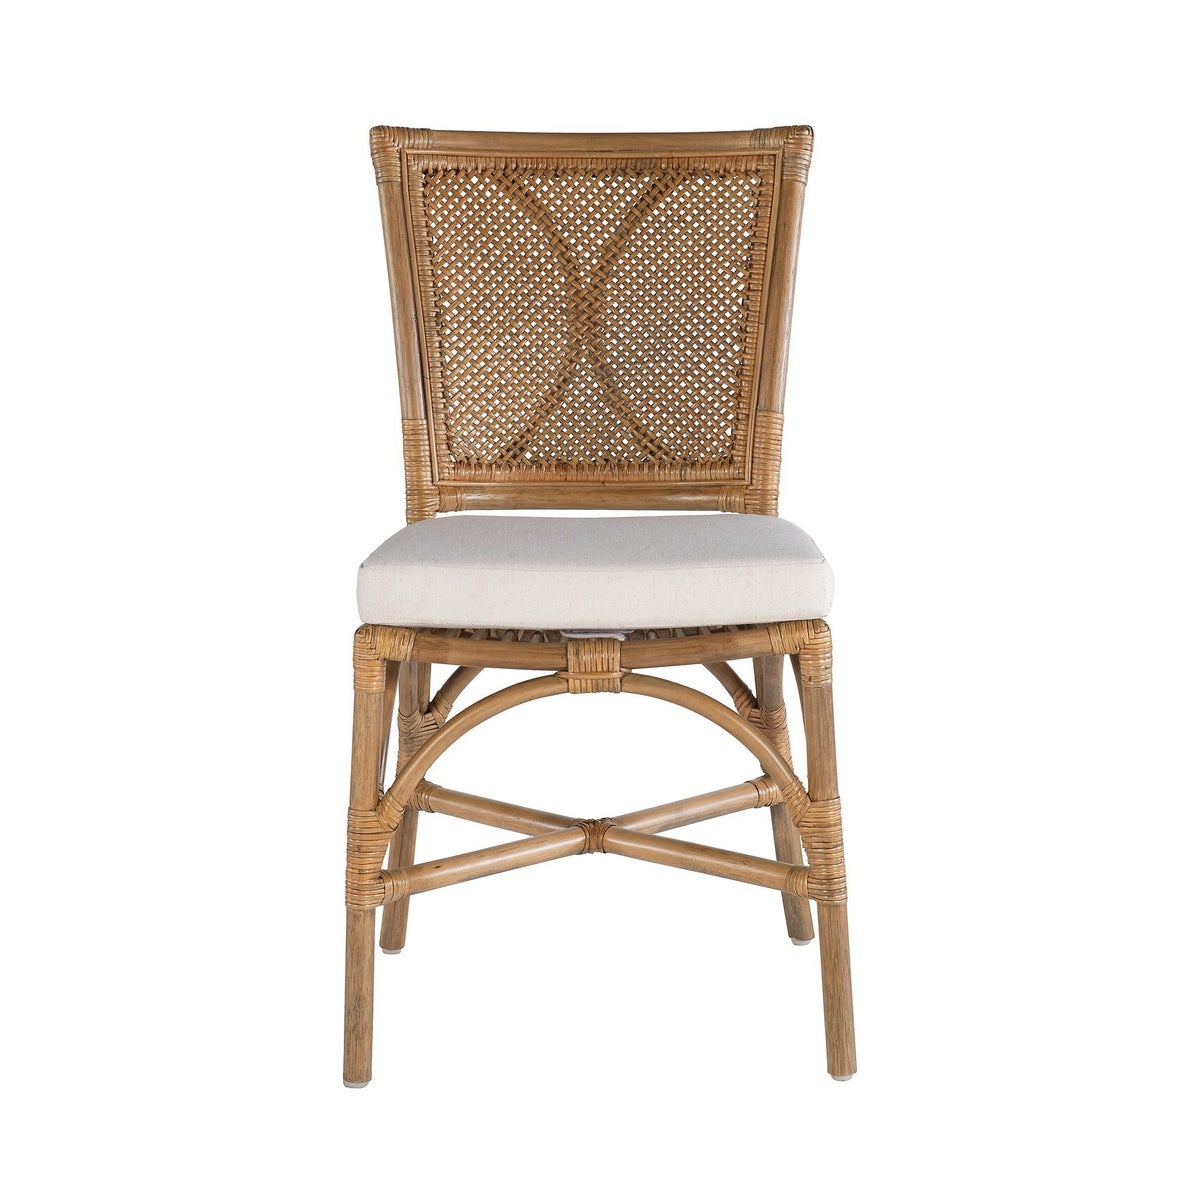 Java Side Chair Rattan Frame & Weave Color - Honey Brown Cushion Color - Cream SOLD IN PAIRS ONL